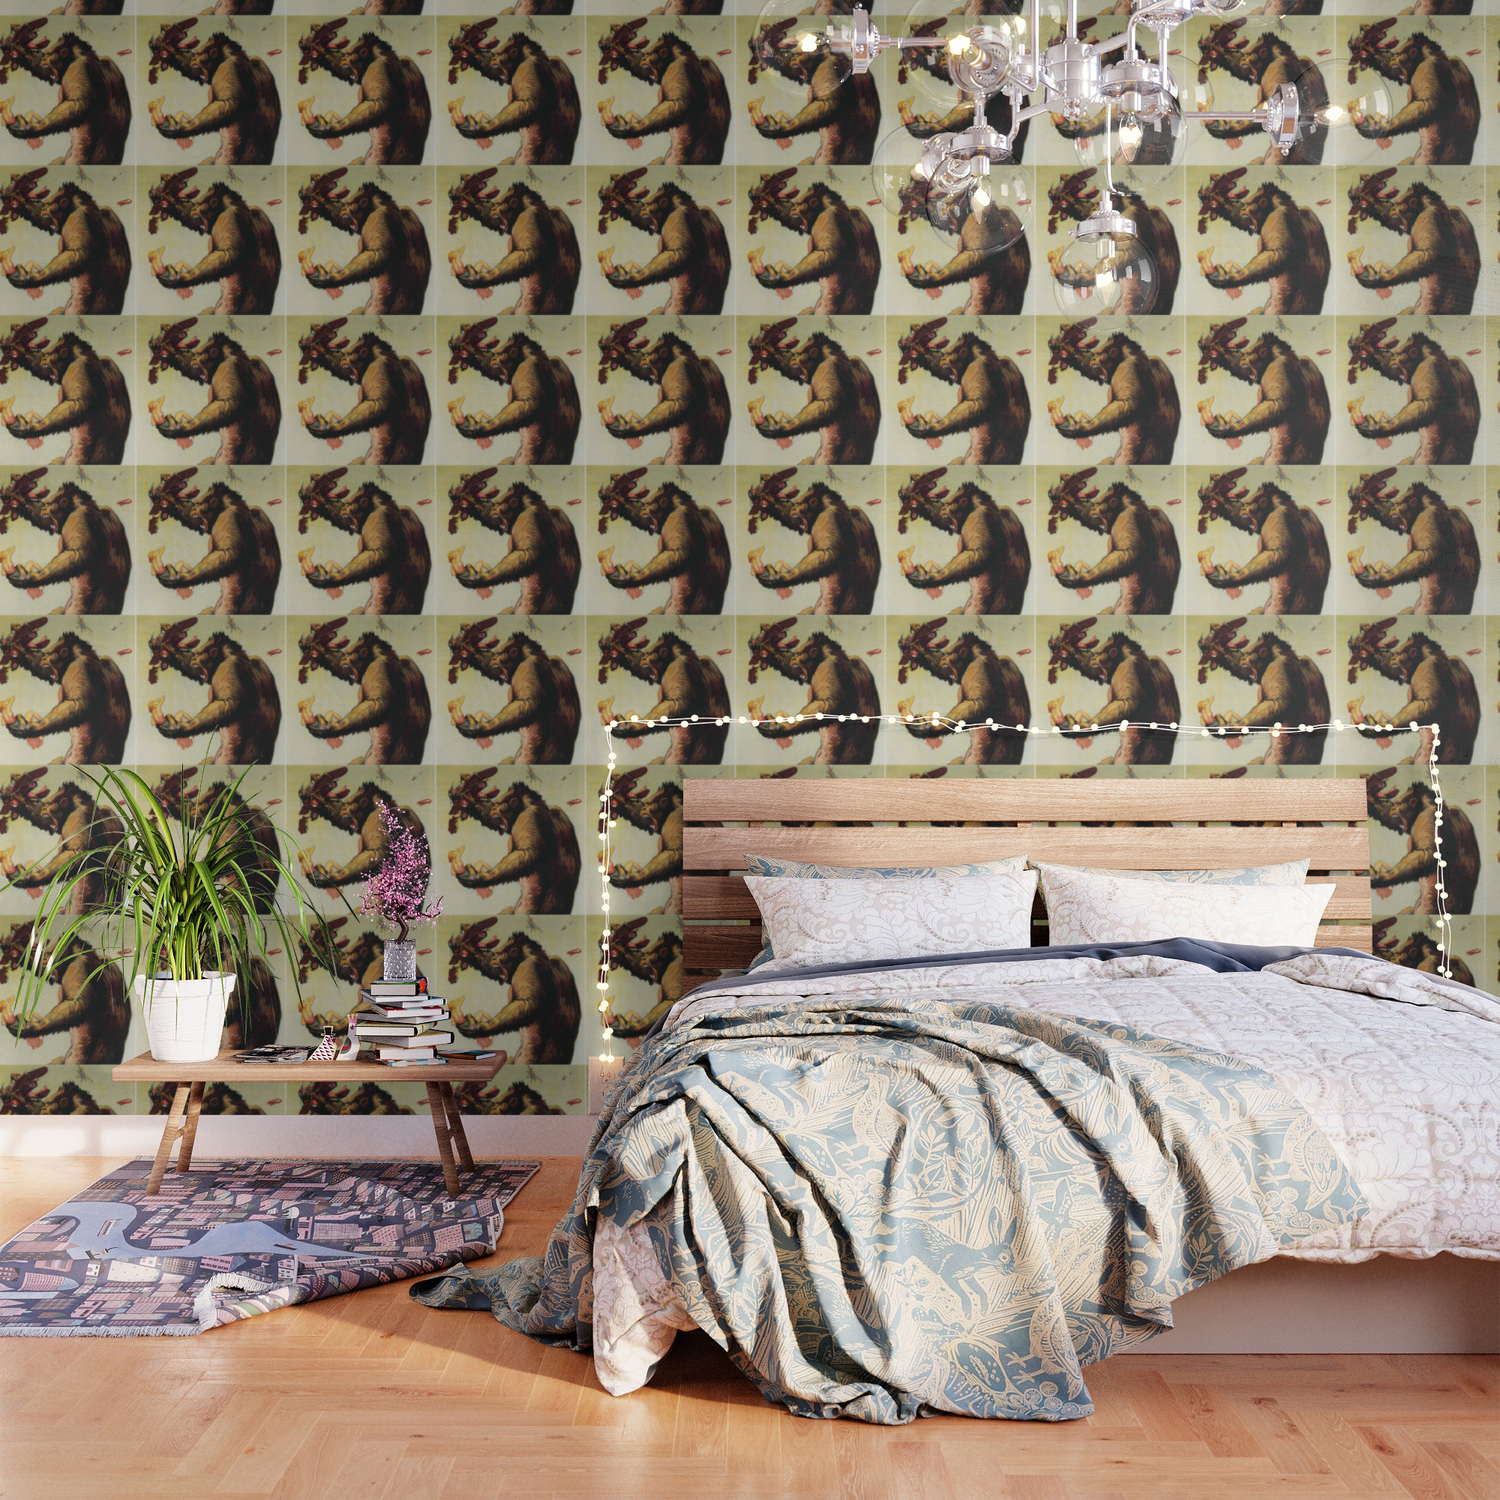 King Kong 1933 Wallpaper by Bacchus Del Nueve | Society6